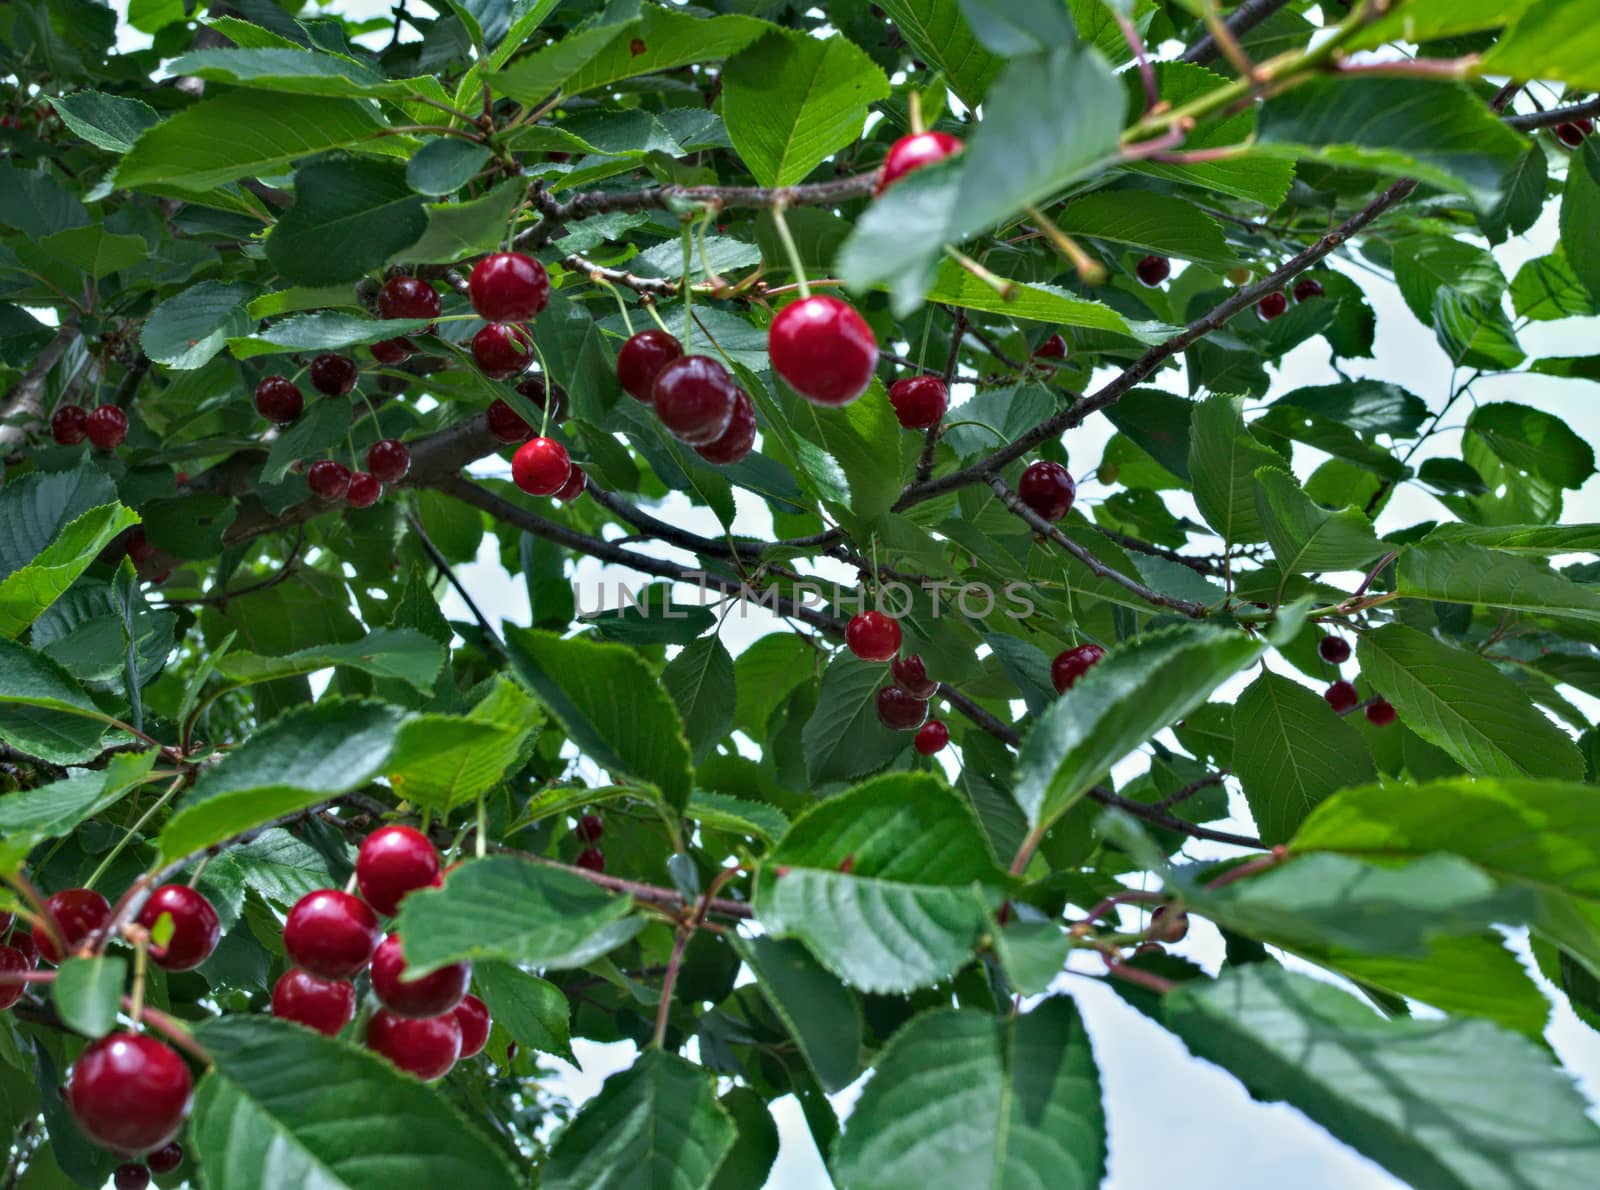 Cherries hanging from branch, ready for harvest